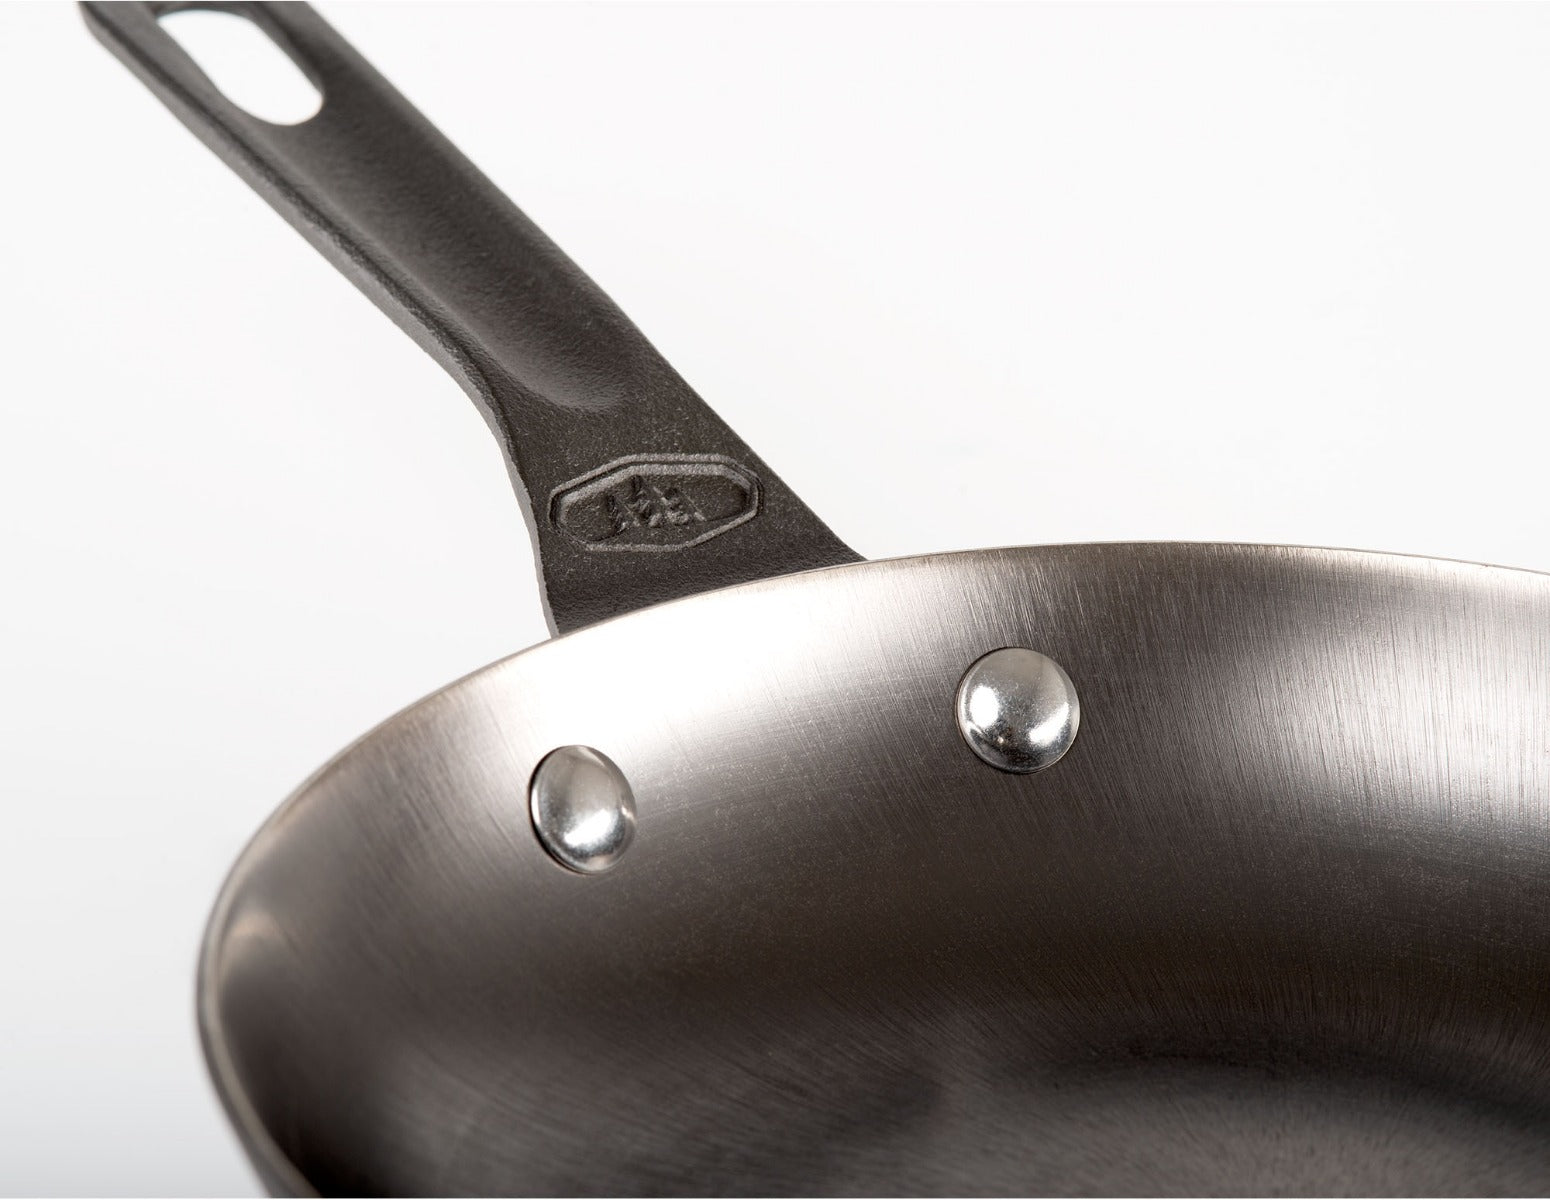 GUIDECAST 12 inch Frying Pan